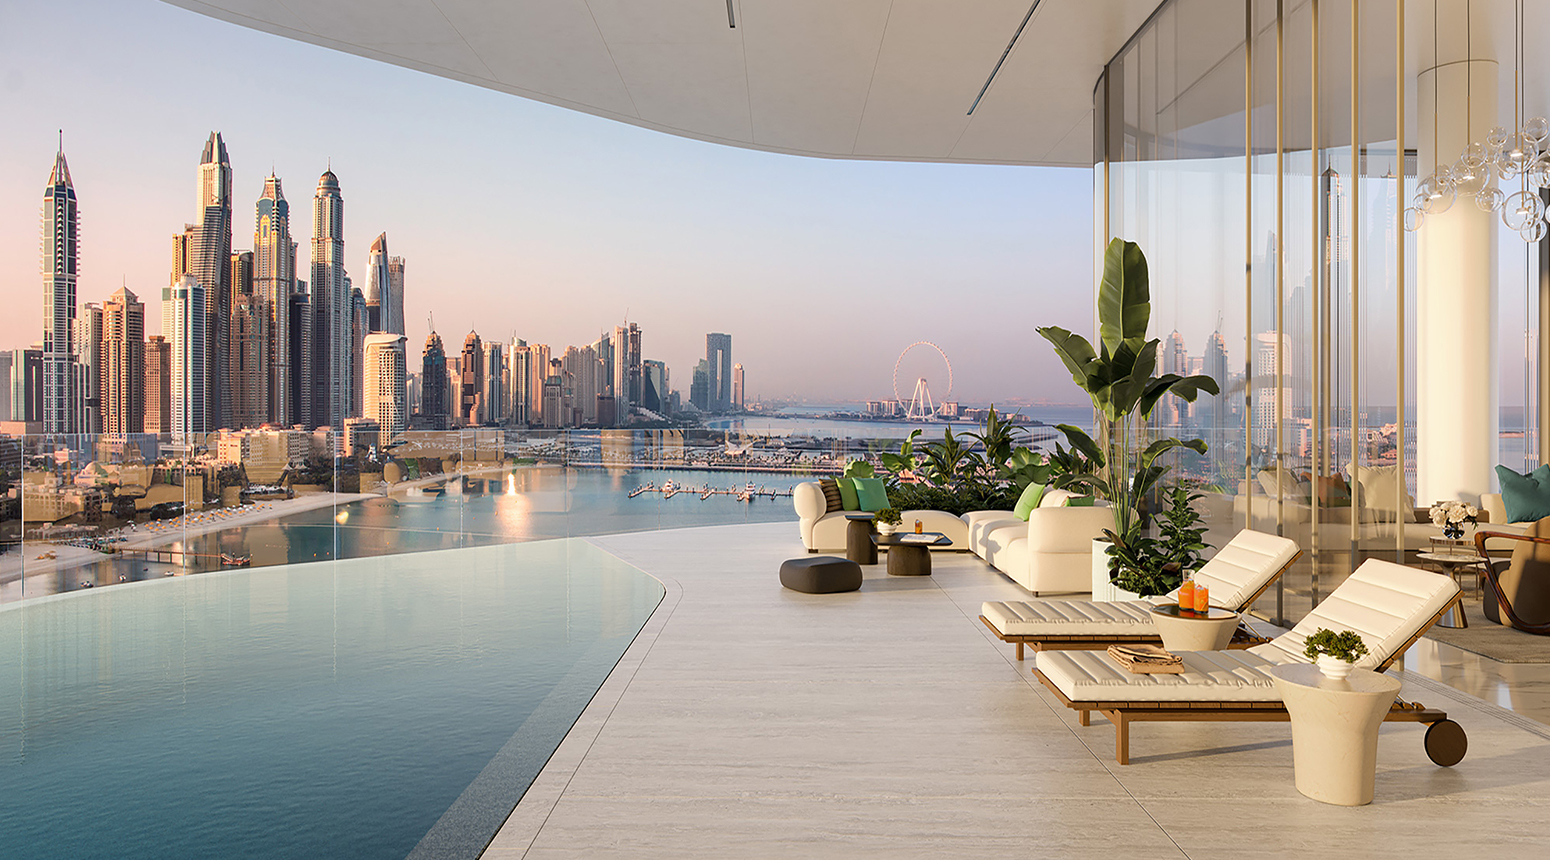 Top 7 Reasons to Buy Best Penthouses in Dubai
